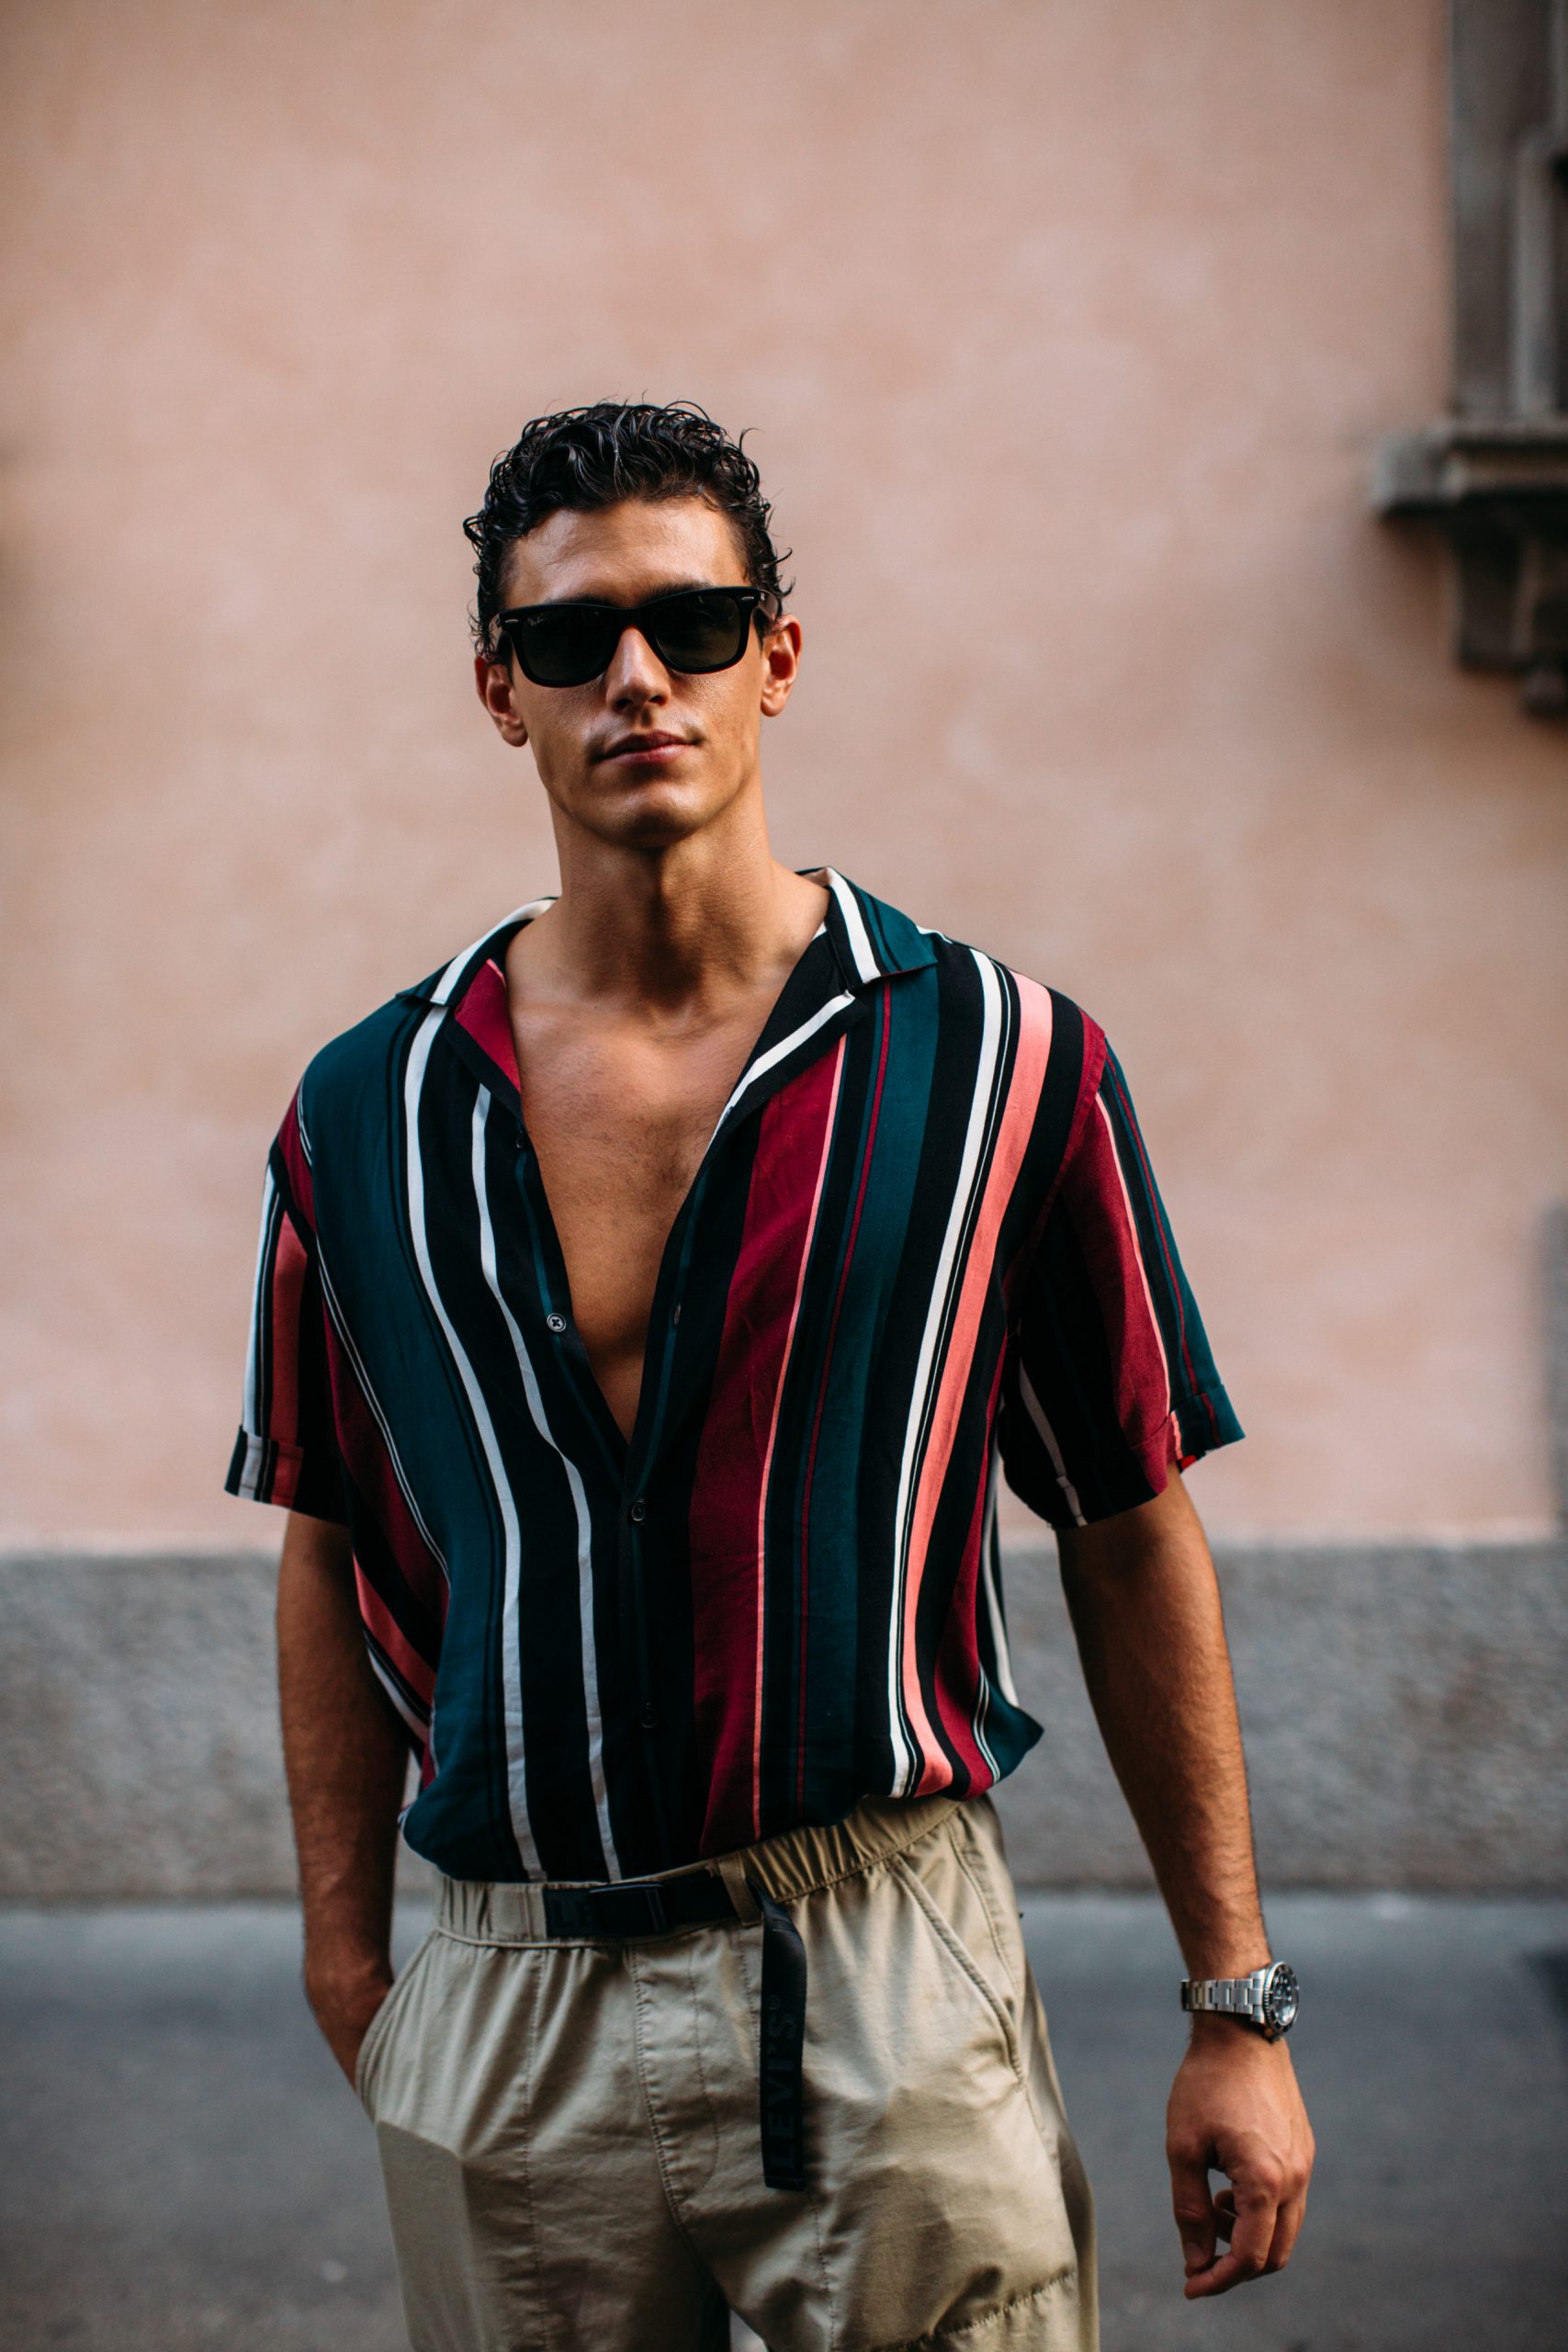 Cruise Through the Rest of Summer in These Billowy Patterned Shirts